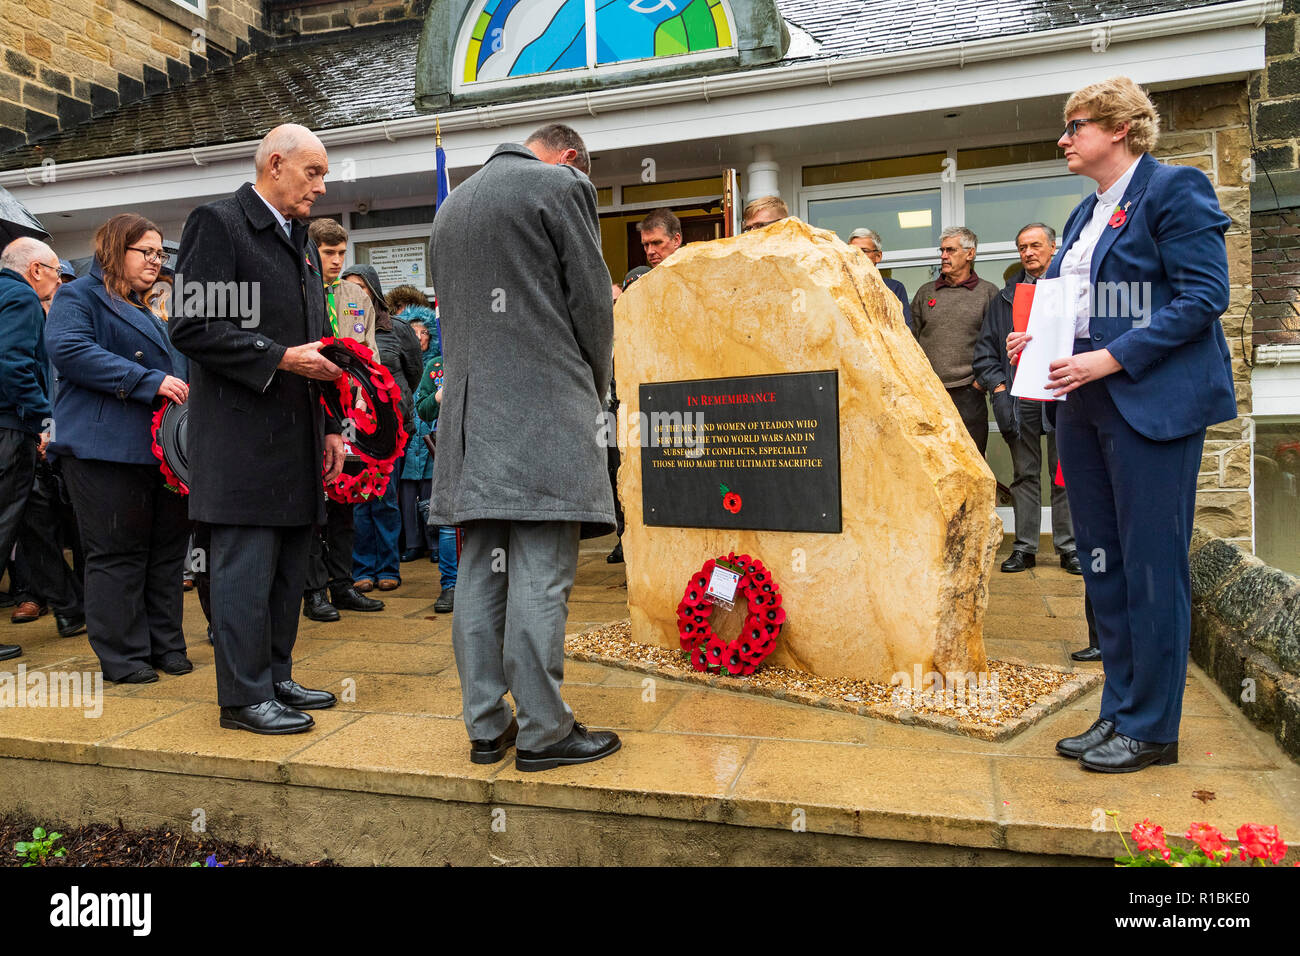 Yeadon, Leeds, West Yorkshire, UK 11th November, 2018. People are gathered round the new war memorial stone in front of Yeadon Methodist Church for a service of dedication & remembrance. The first poppy wreath has been laid and a man is bowing his head in respect. Ian Lamond/Alamy Live News. Stock Photo